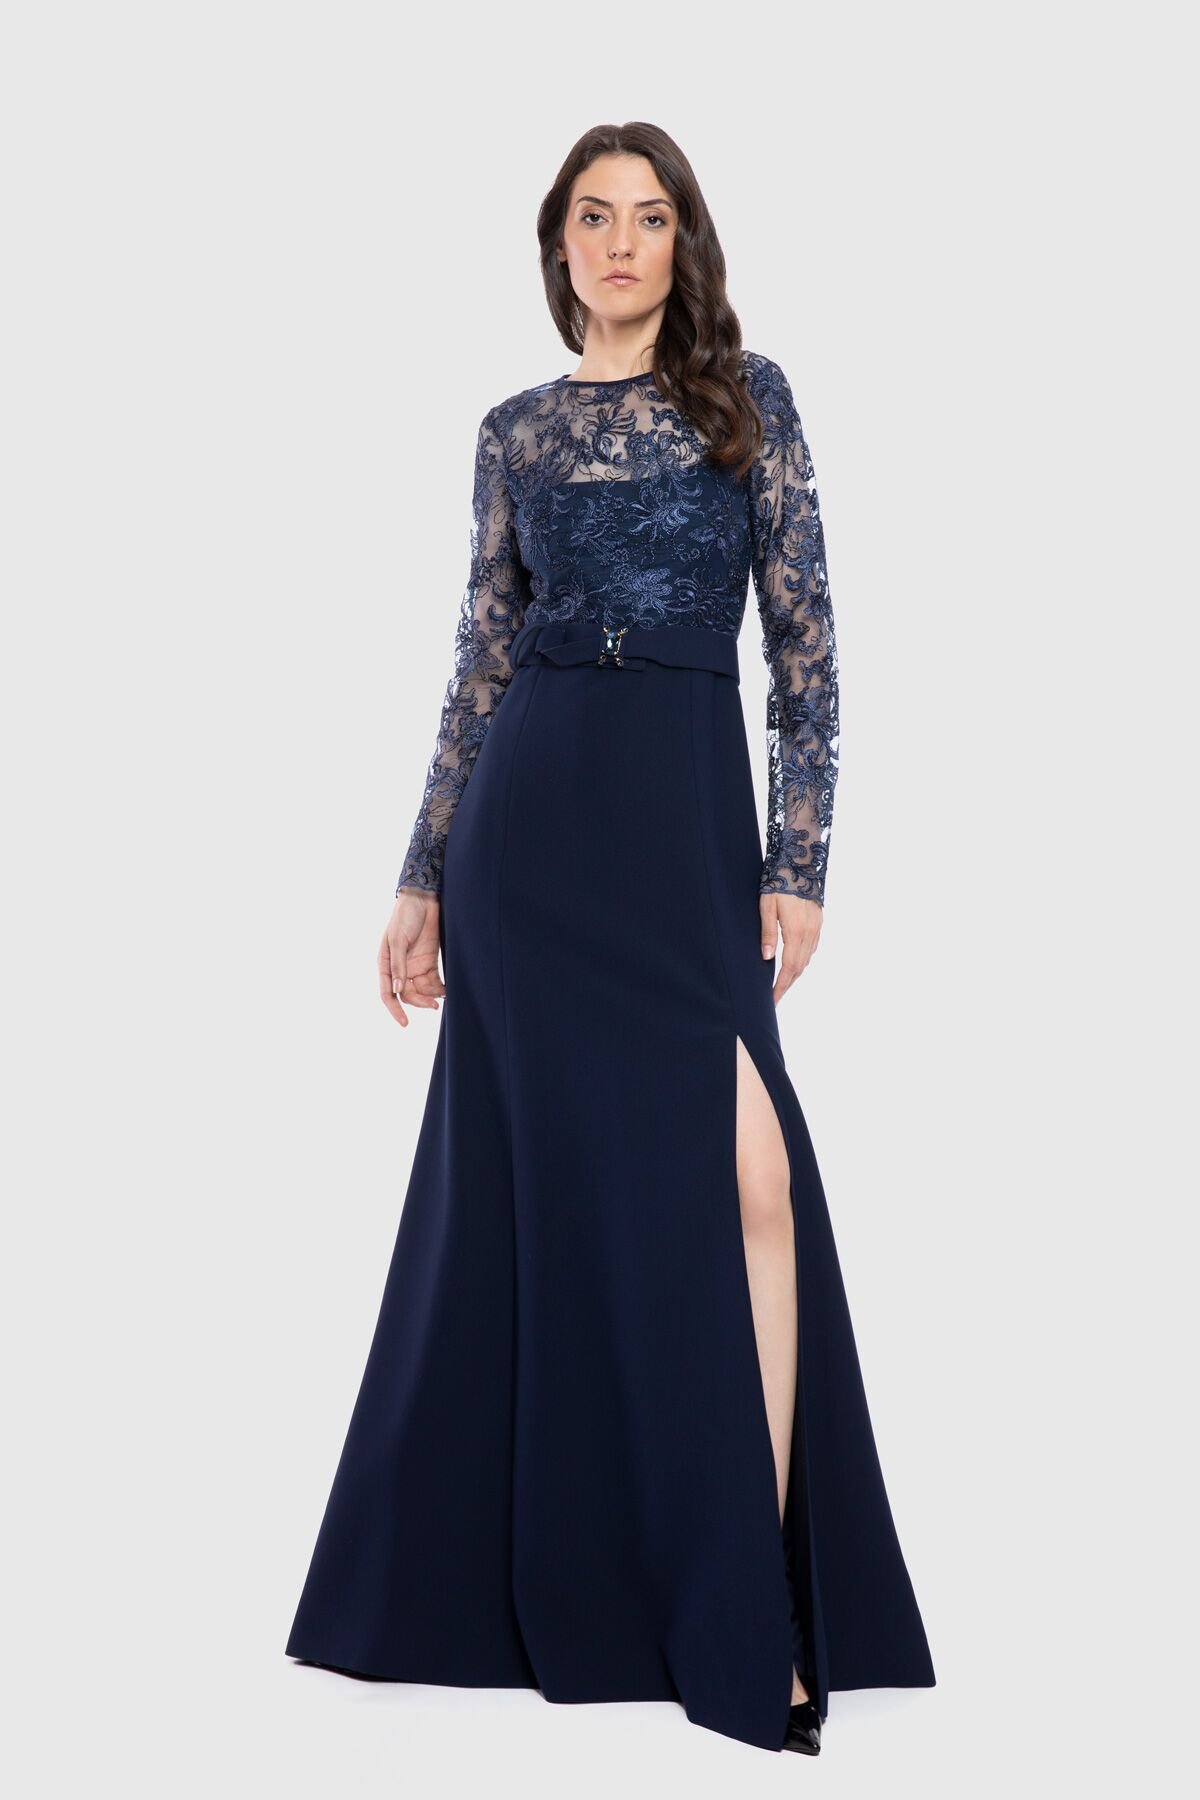 With Lace Detailed Slit Top Long Navy Blue Dress